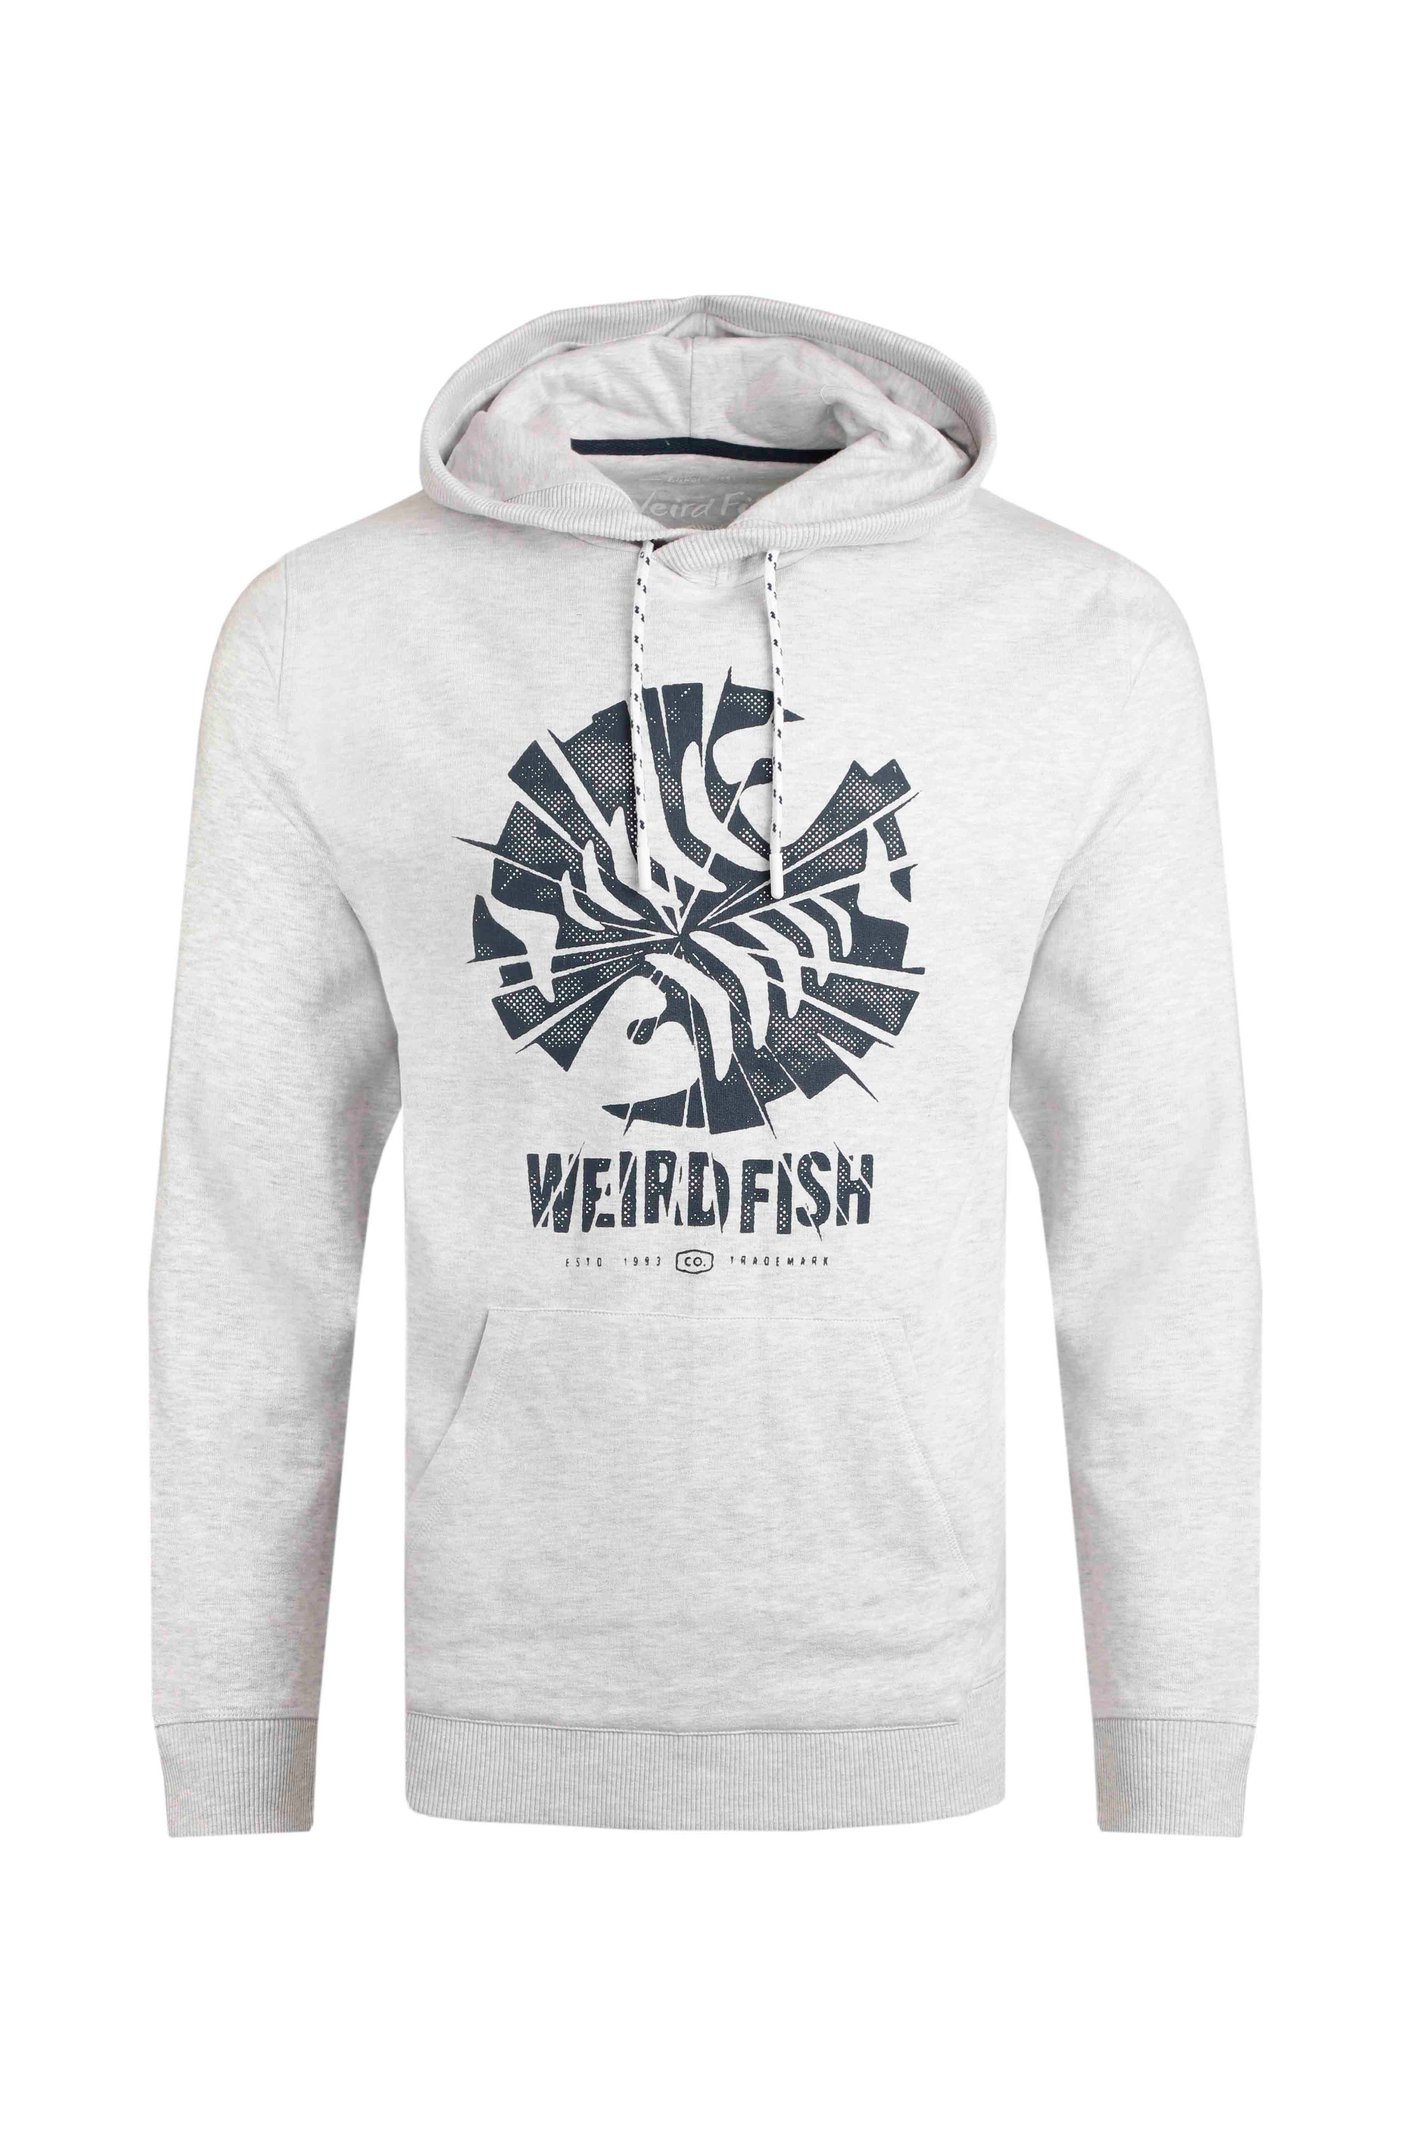 weird fish bryant graphic pop over hoodie storm grey size s